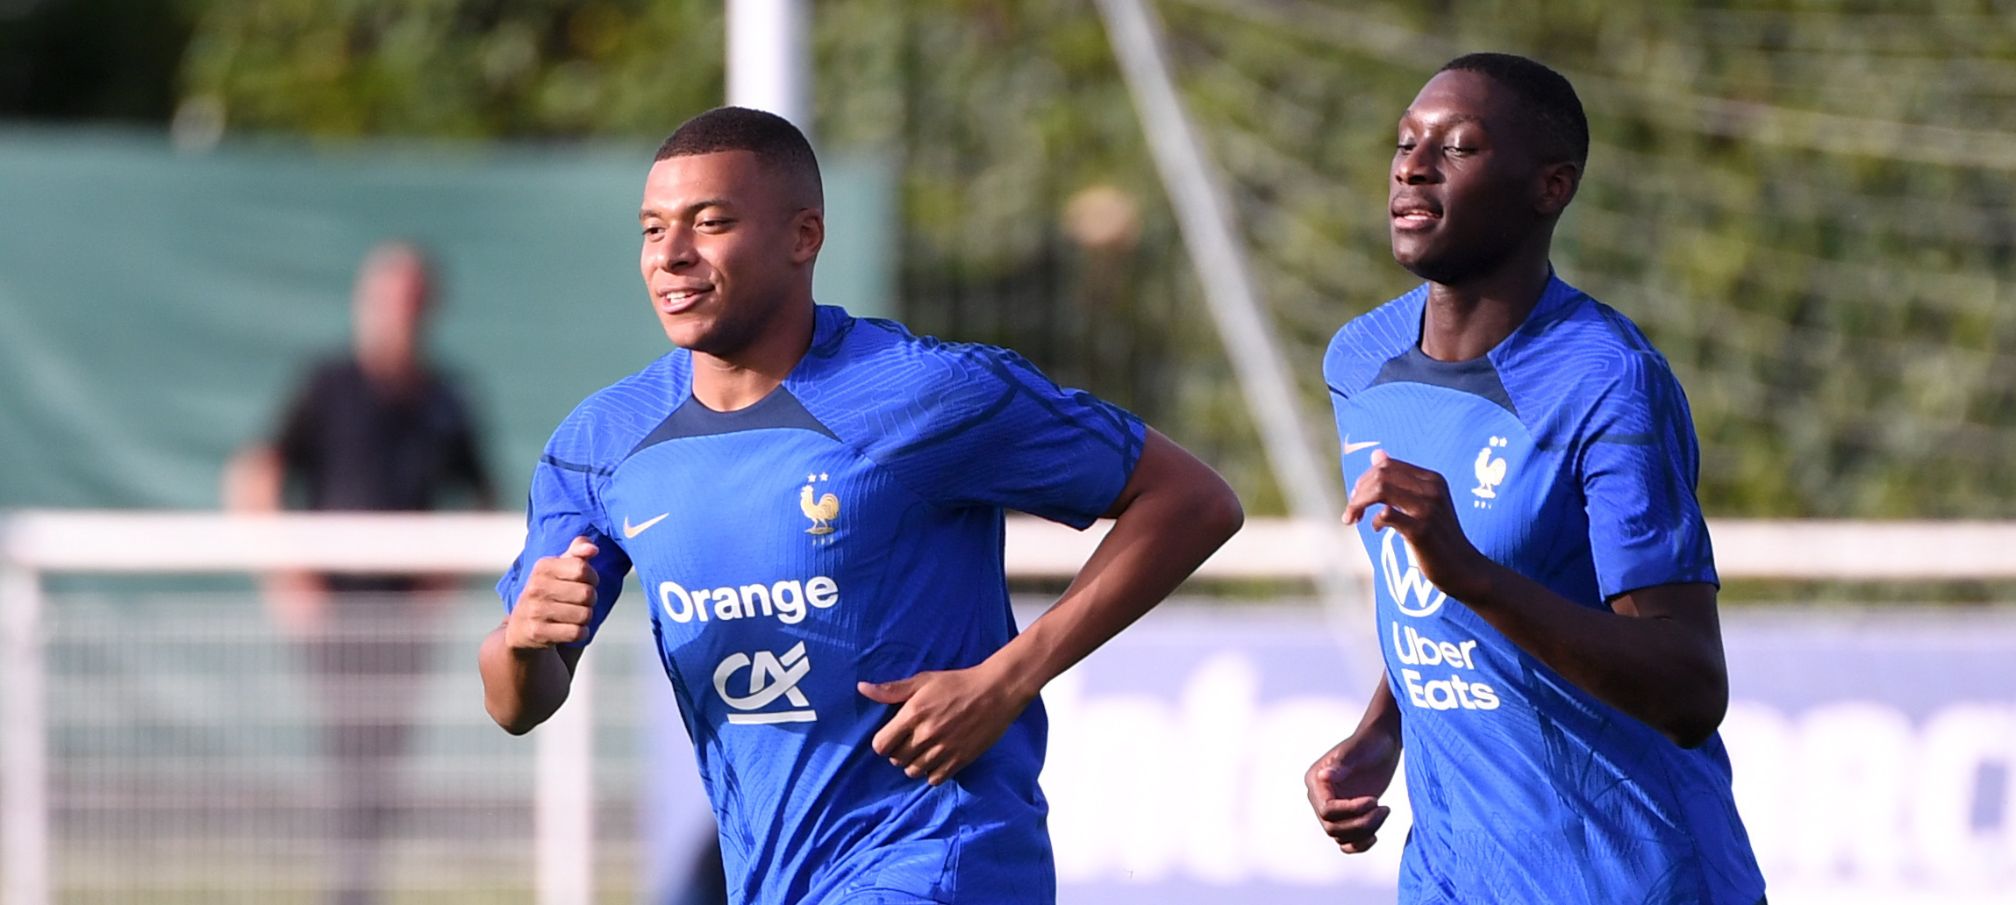 France turn to Randal Kolo Muani as they prepare for life after